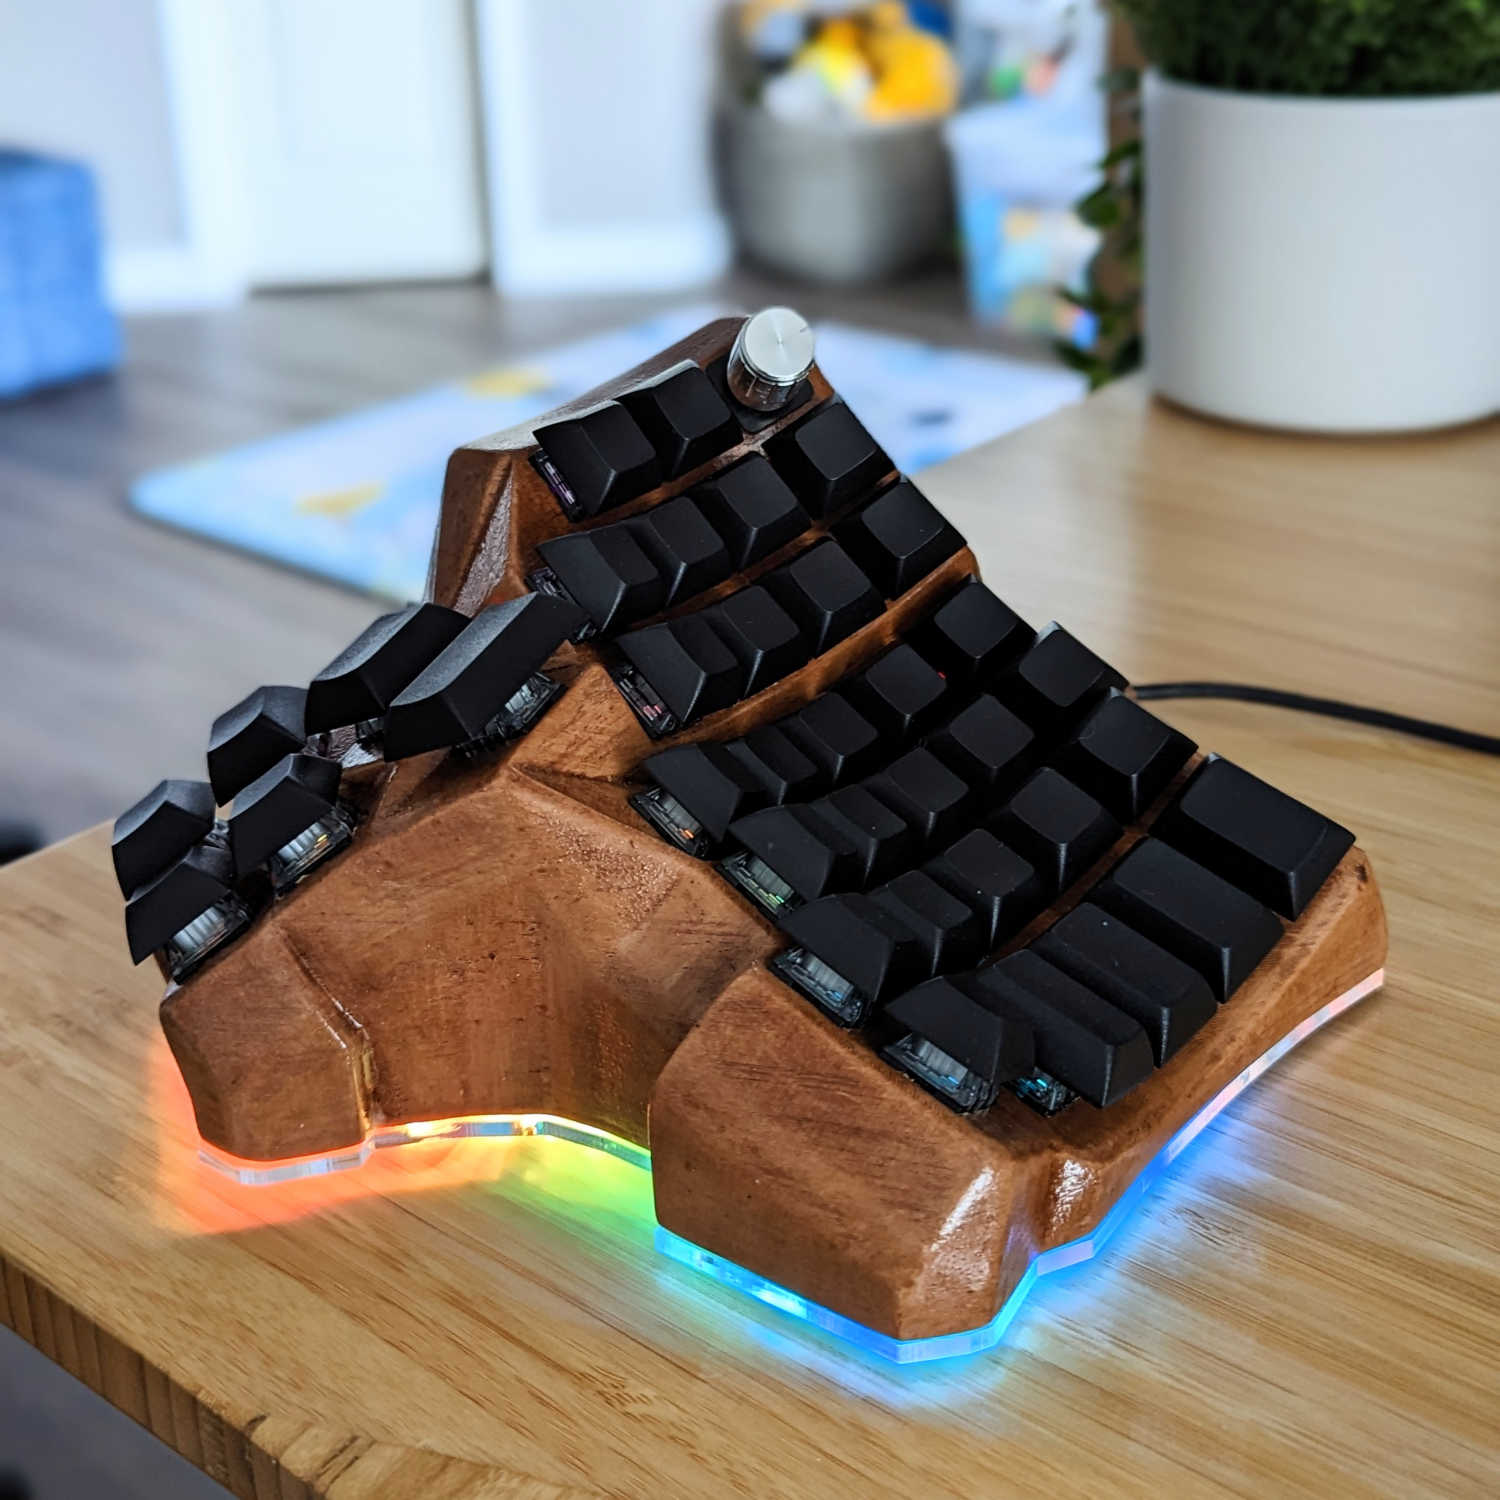 A picture of half a Dactyl Manuform keyboard